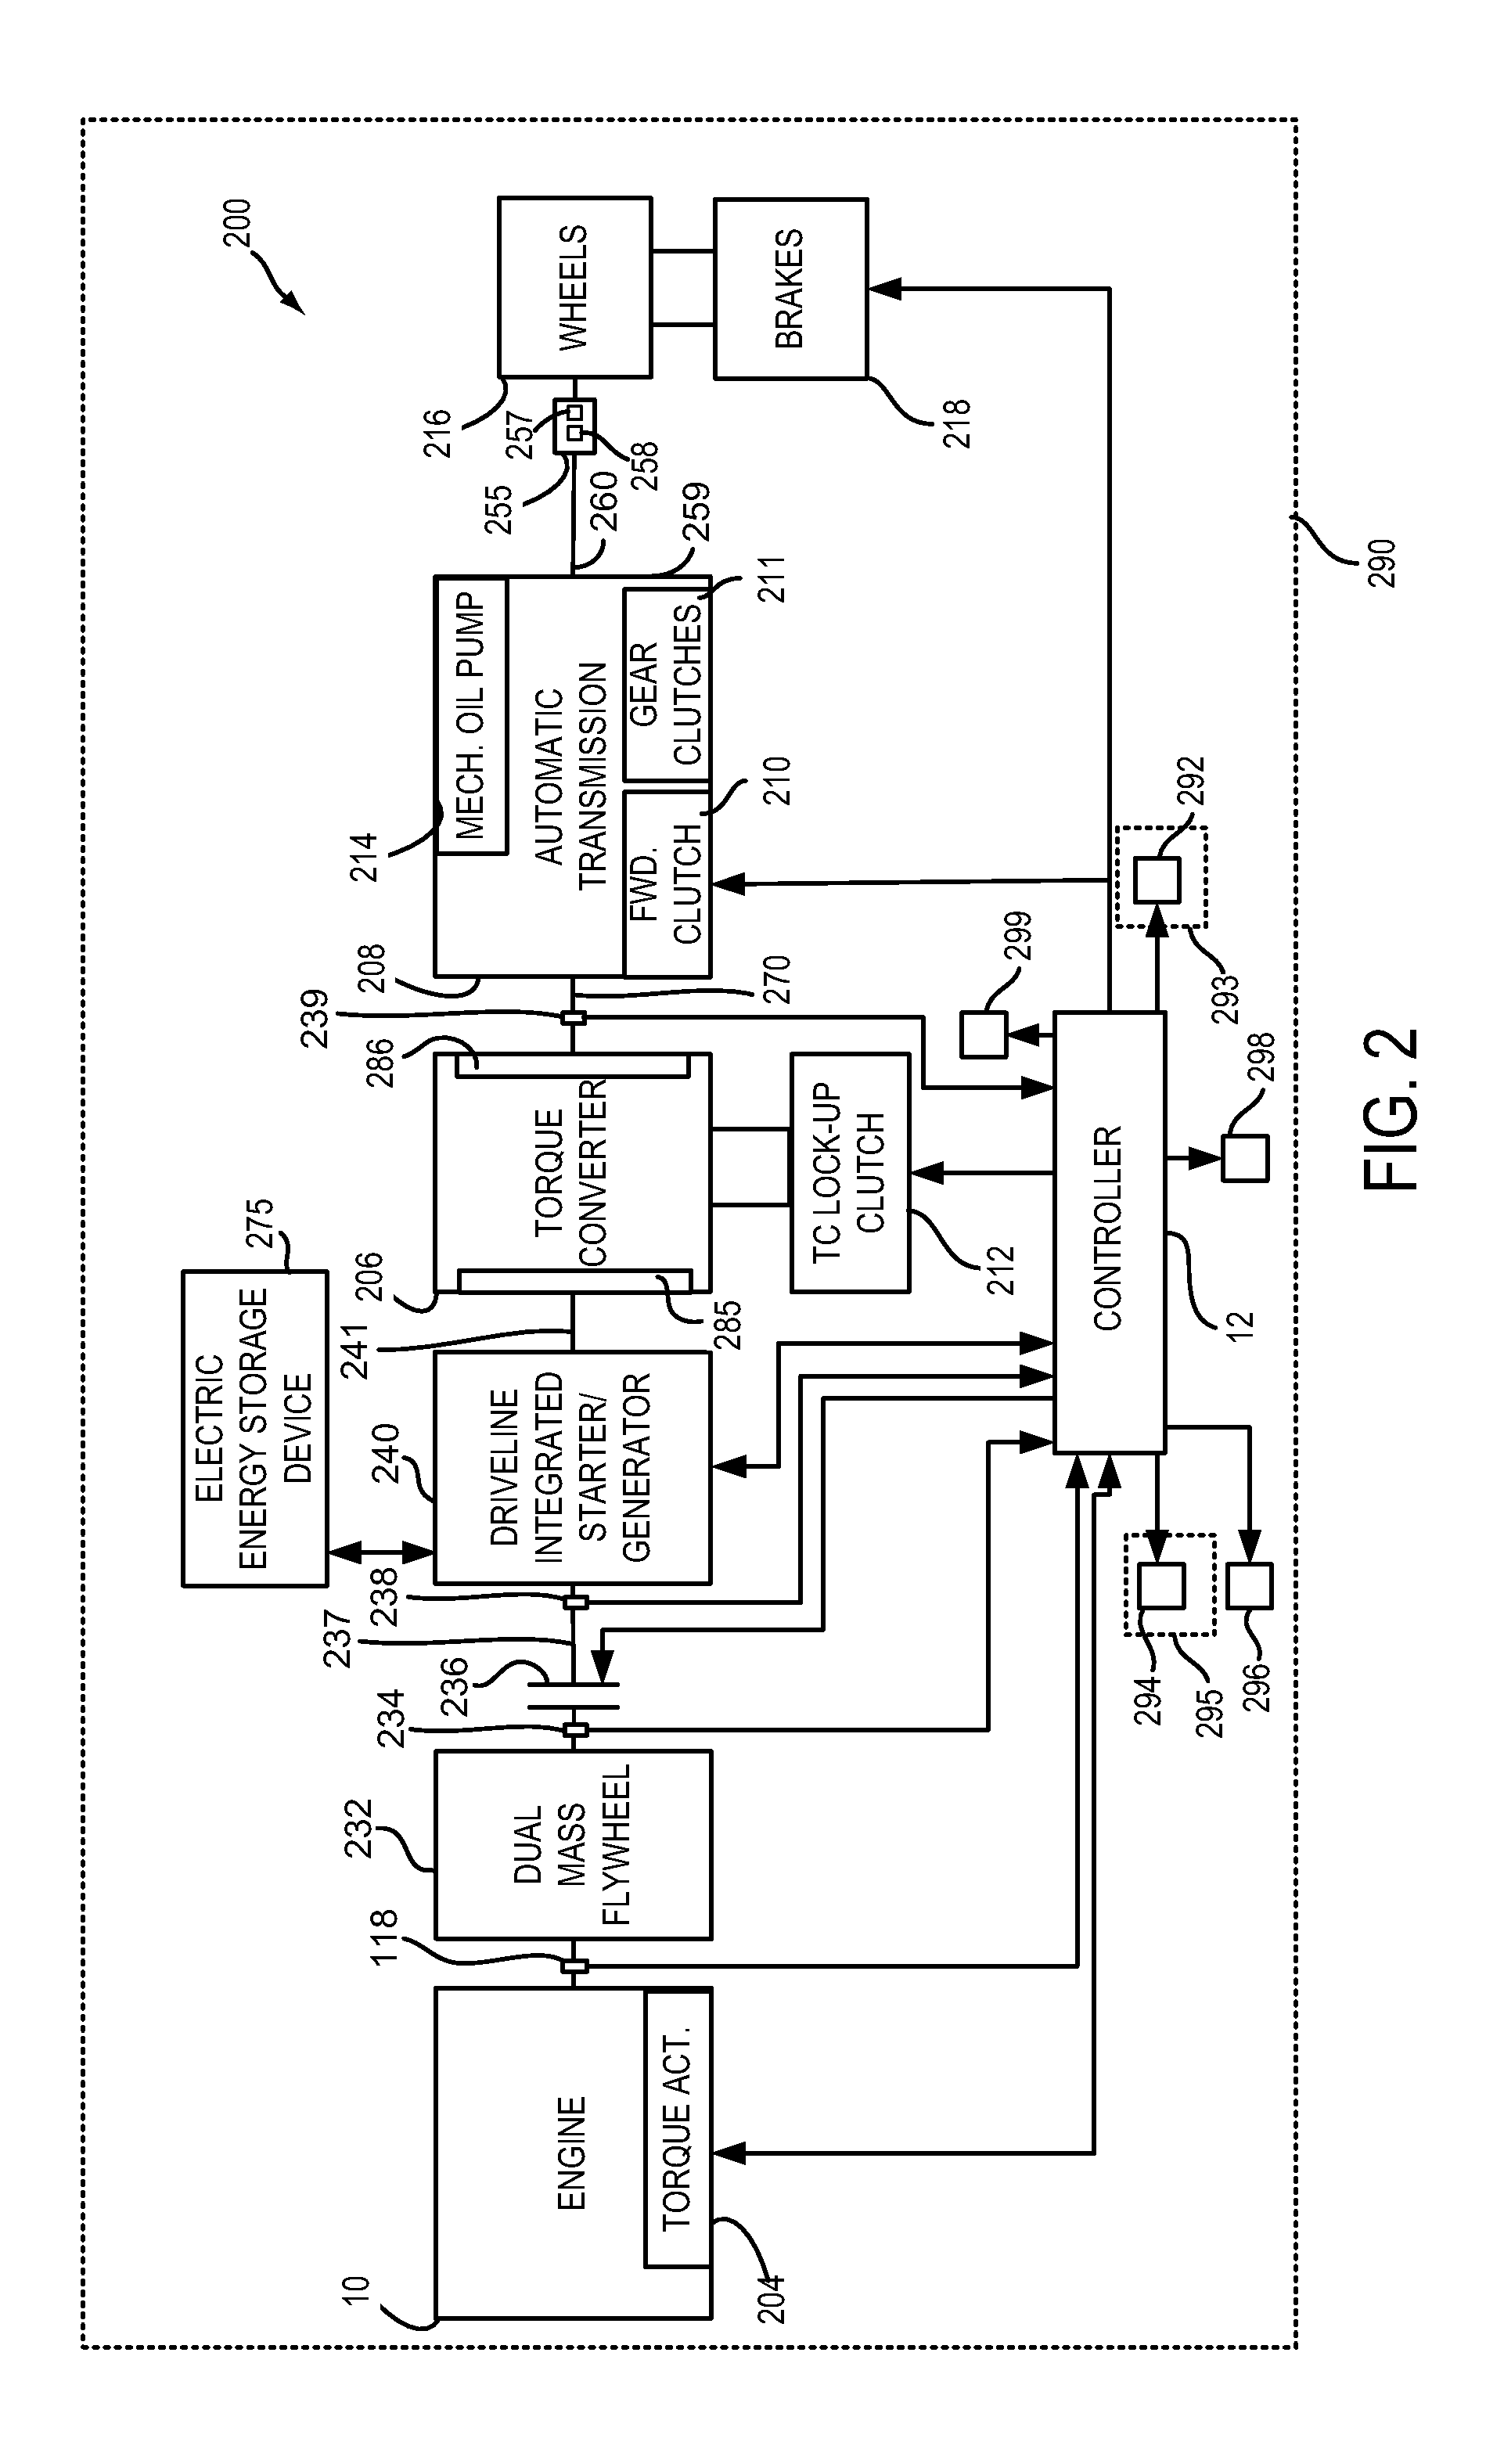 Methods and systems for transitioning between braking modes